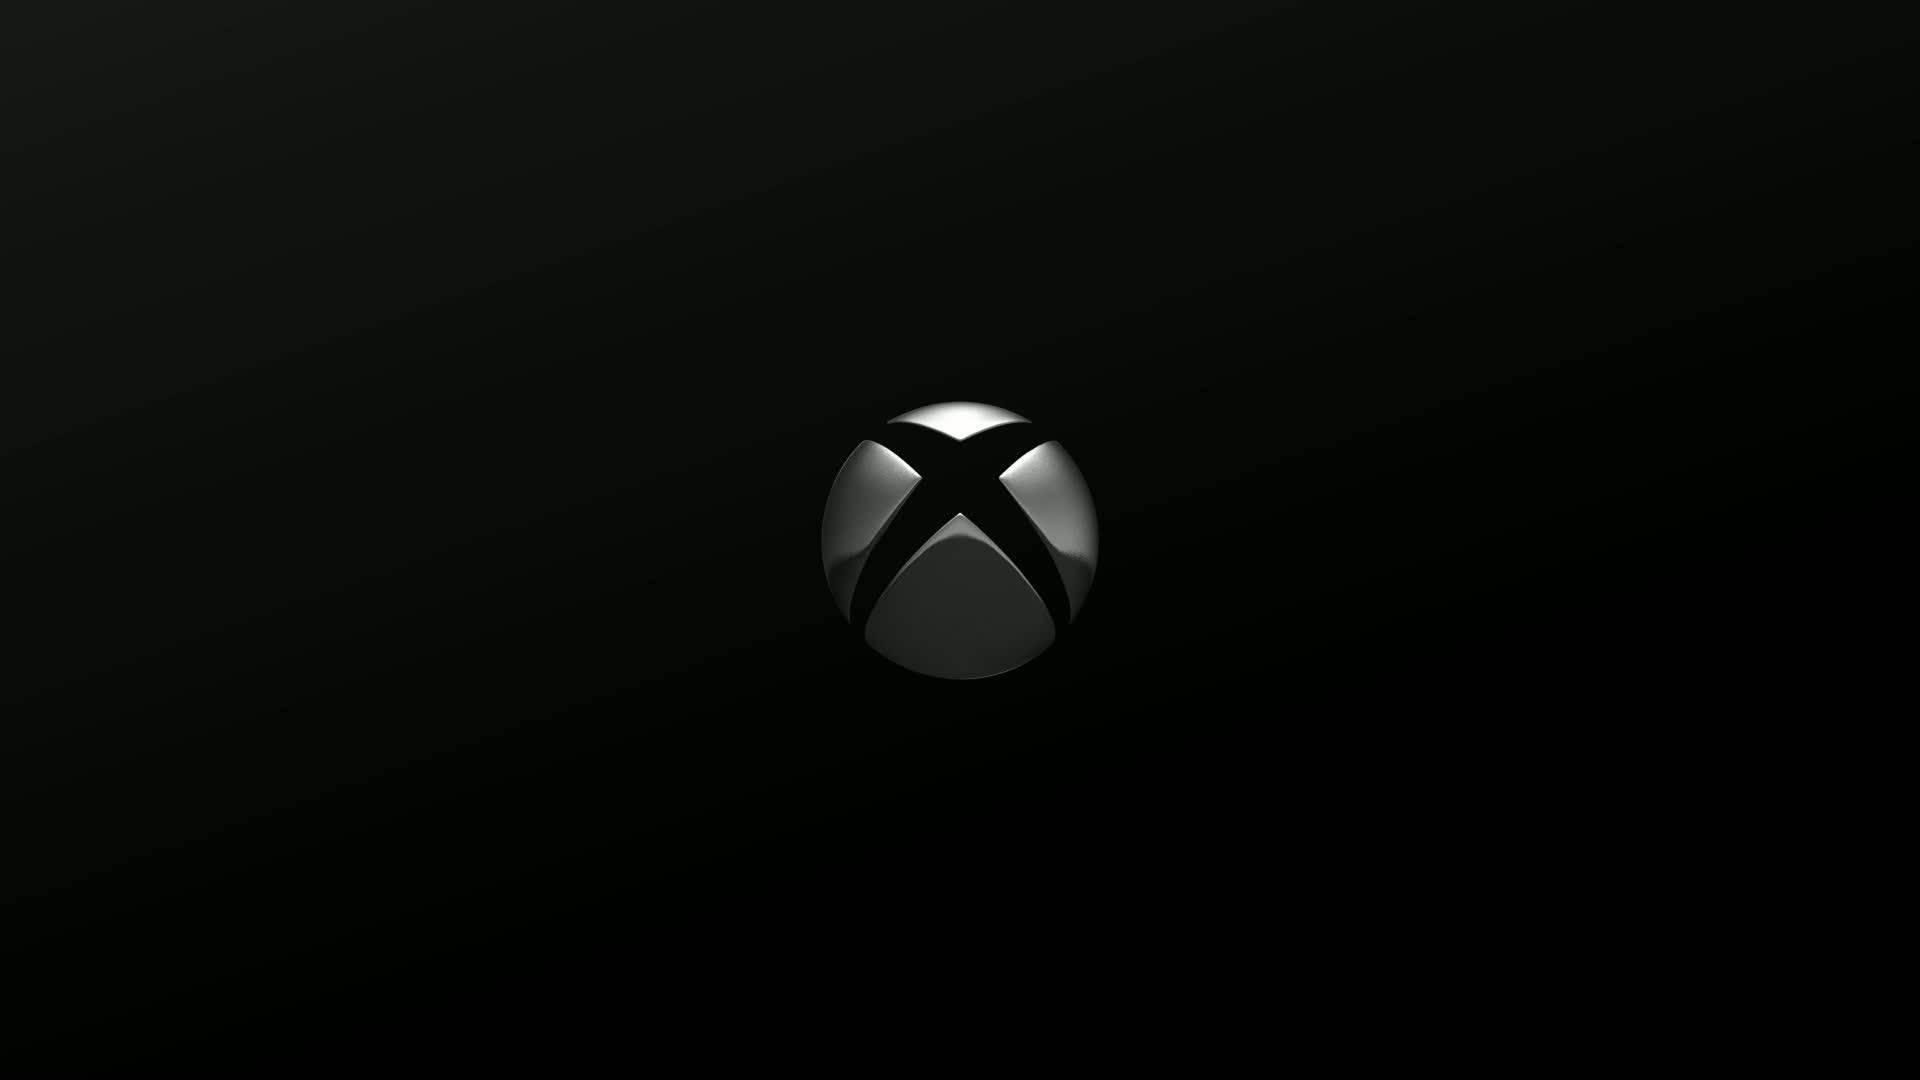 Desktop Background: Xbox One Console Wallpaper, Xbox One Console